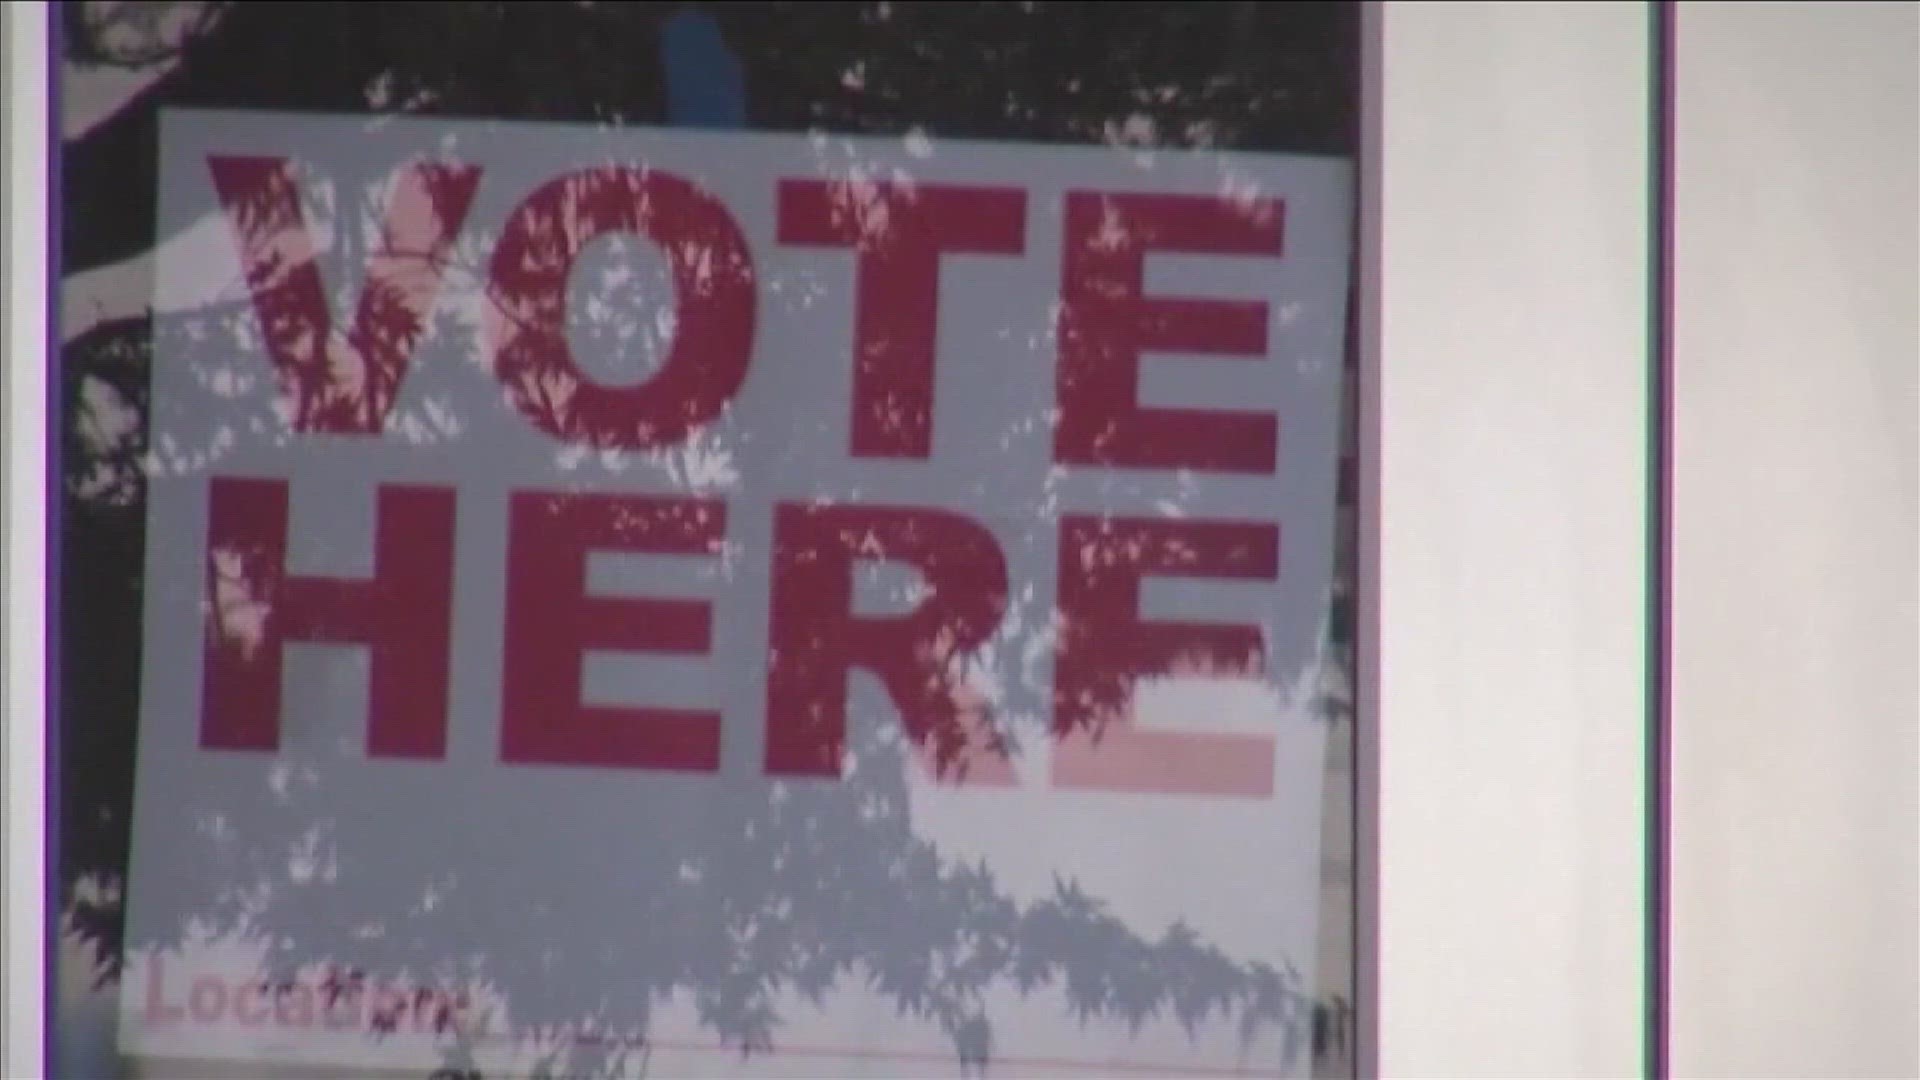 The election for the next Memphis mayor is next month, and voter registration ends Tuesday.